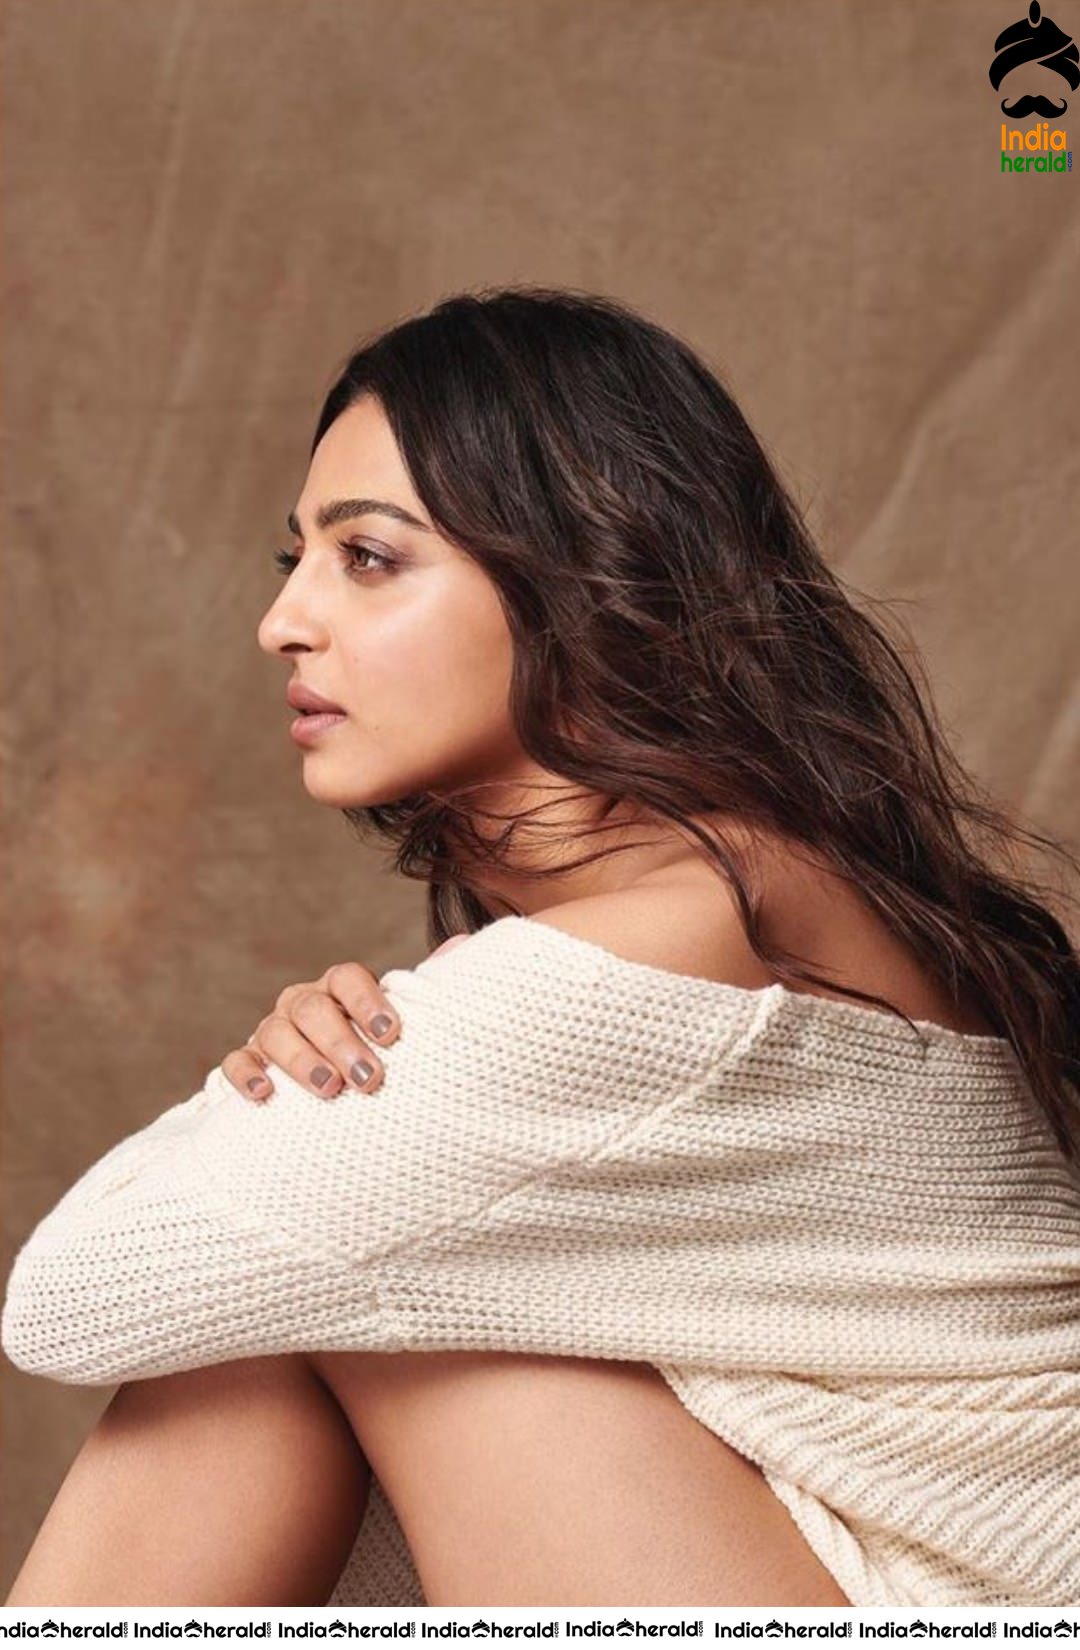 Radhika Apte Hottest Sexy Photos Collection to tease your inner temptations Set 2